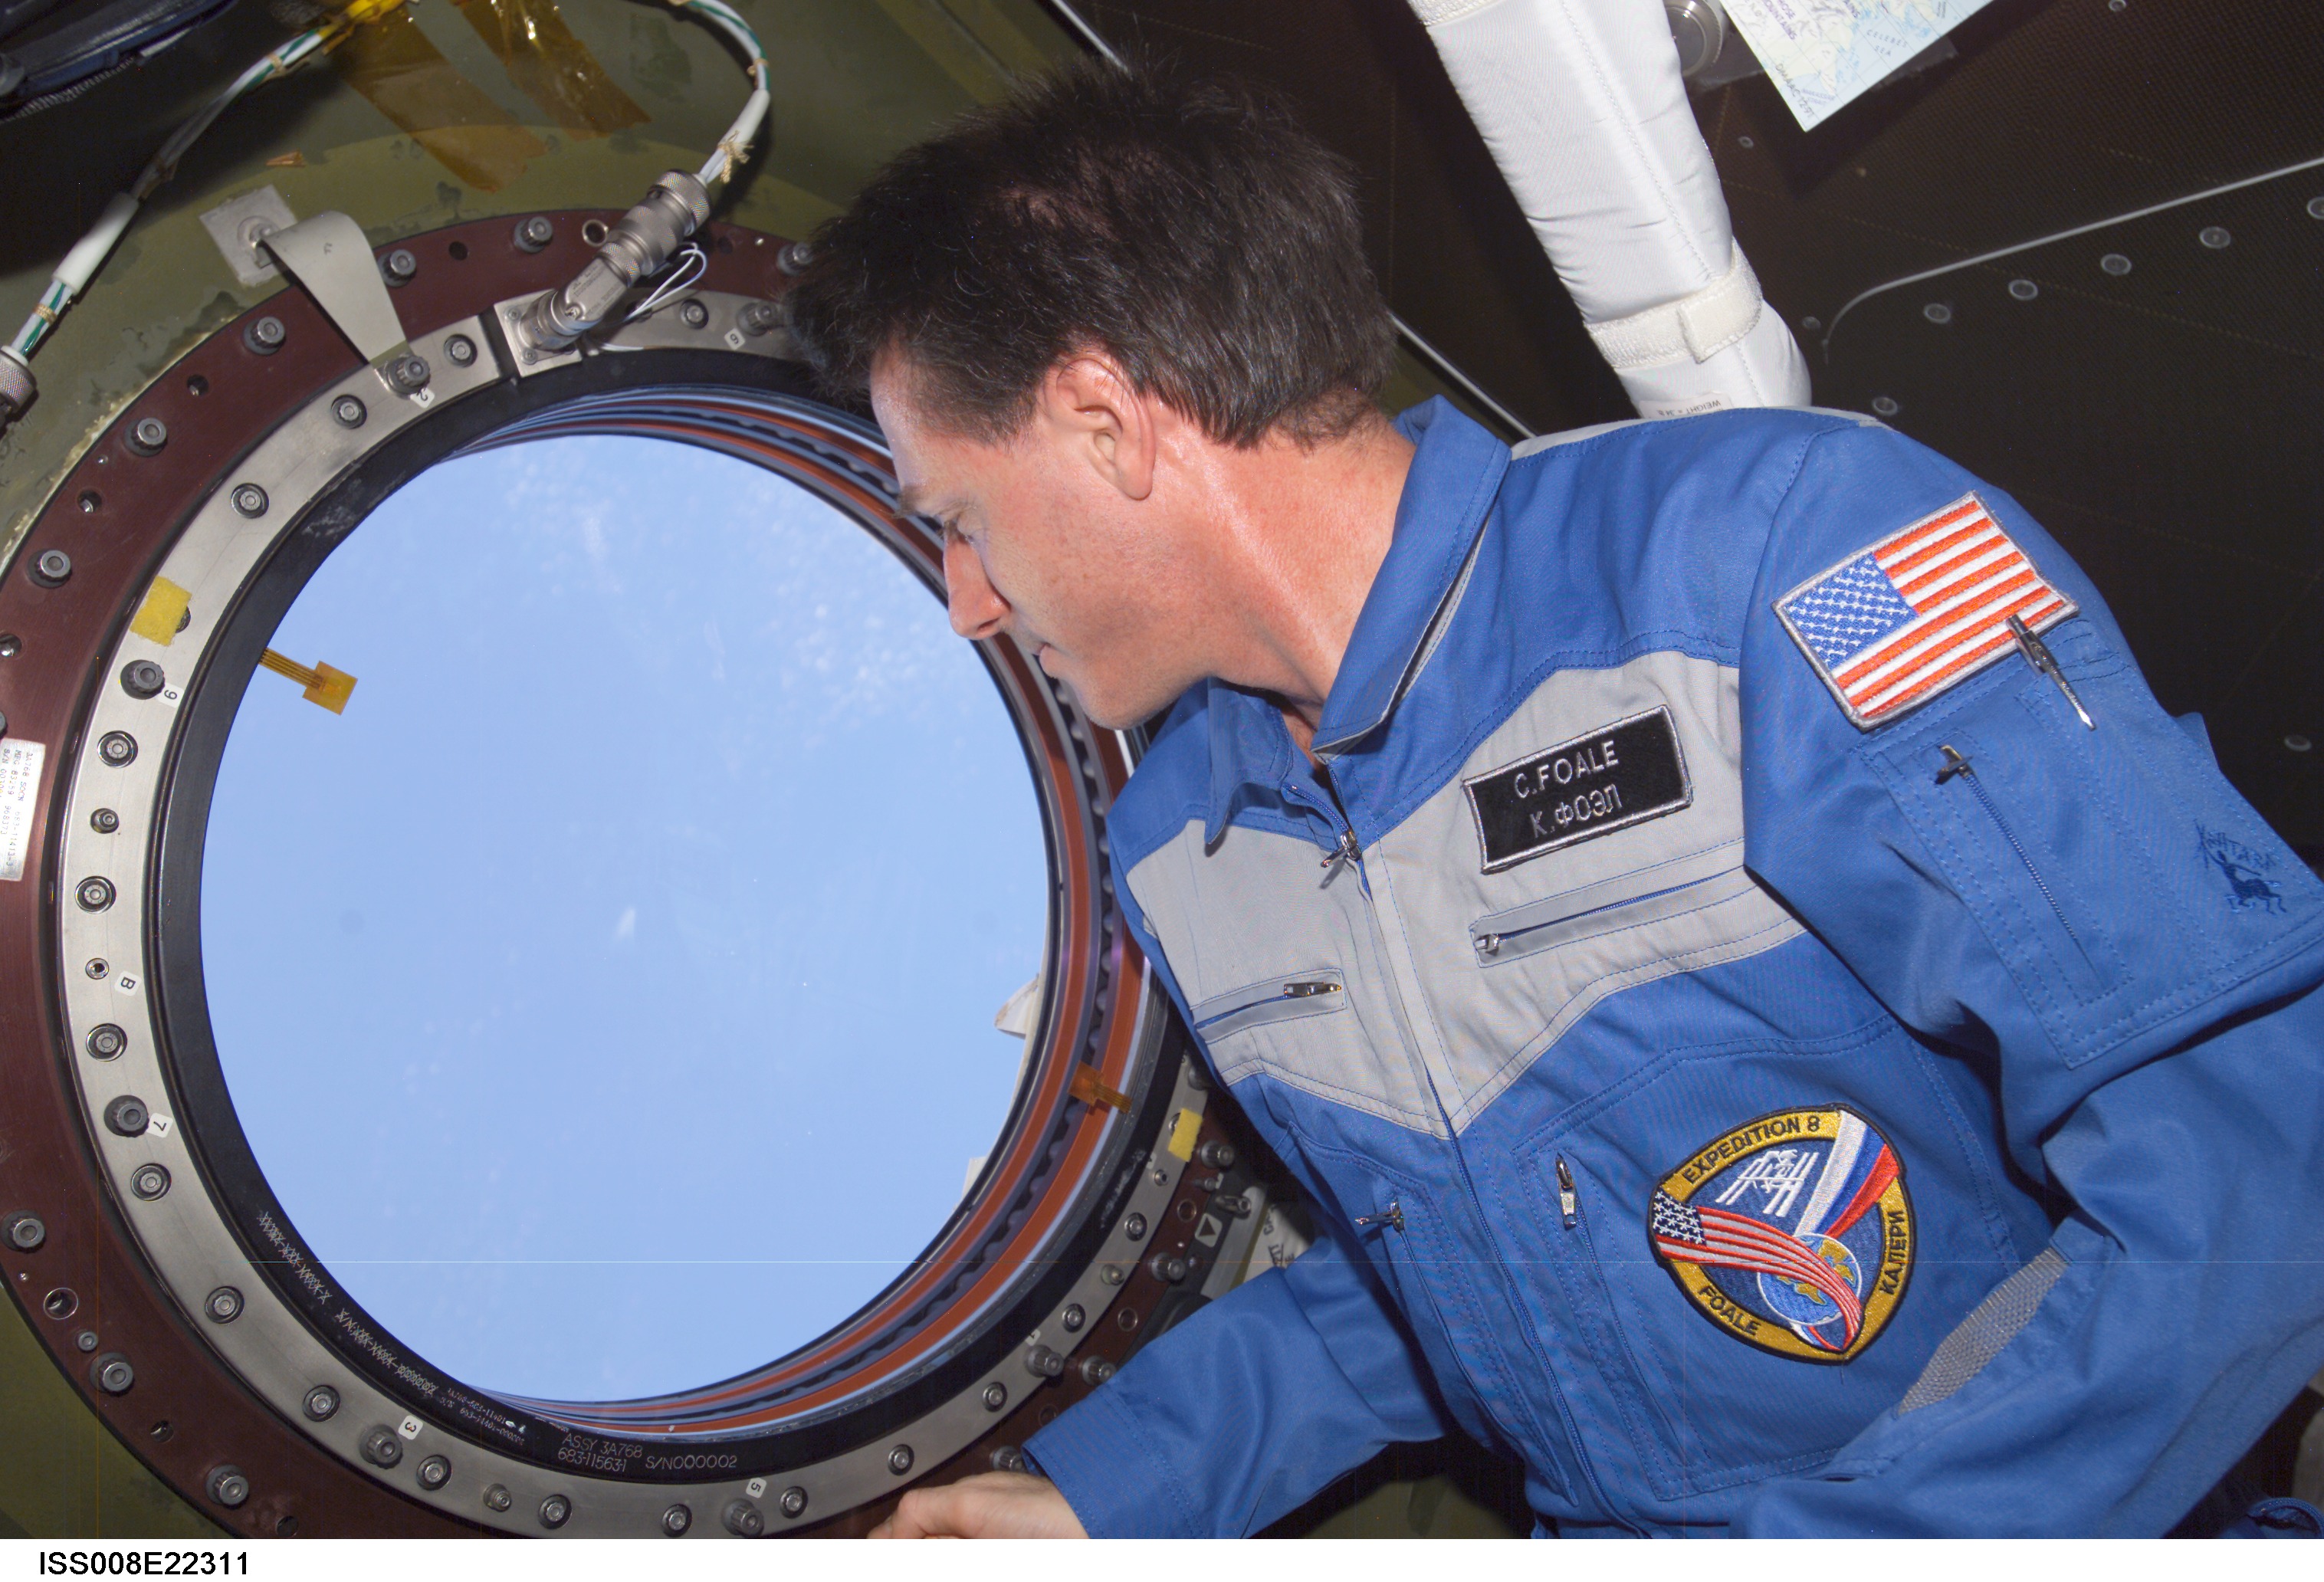 Perhaps aware that his sixth mission would be his last, Foale gazes wistfully through the Destiny laboratory nadir window in April 2004, in the final days of his six-month Expedition 8 mission. Photo Credit: NASA